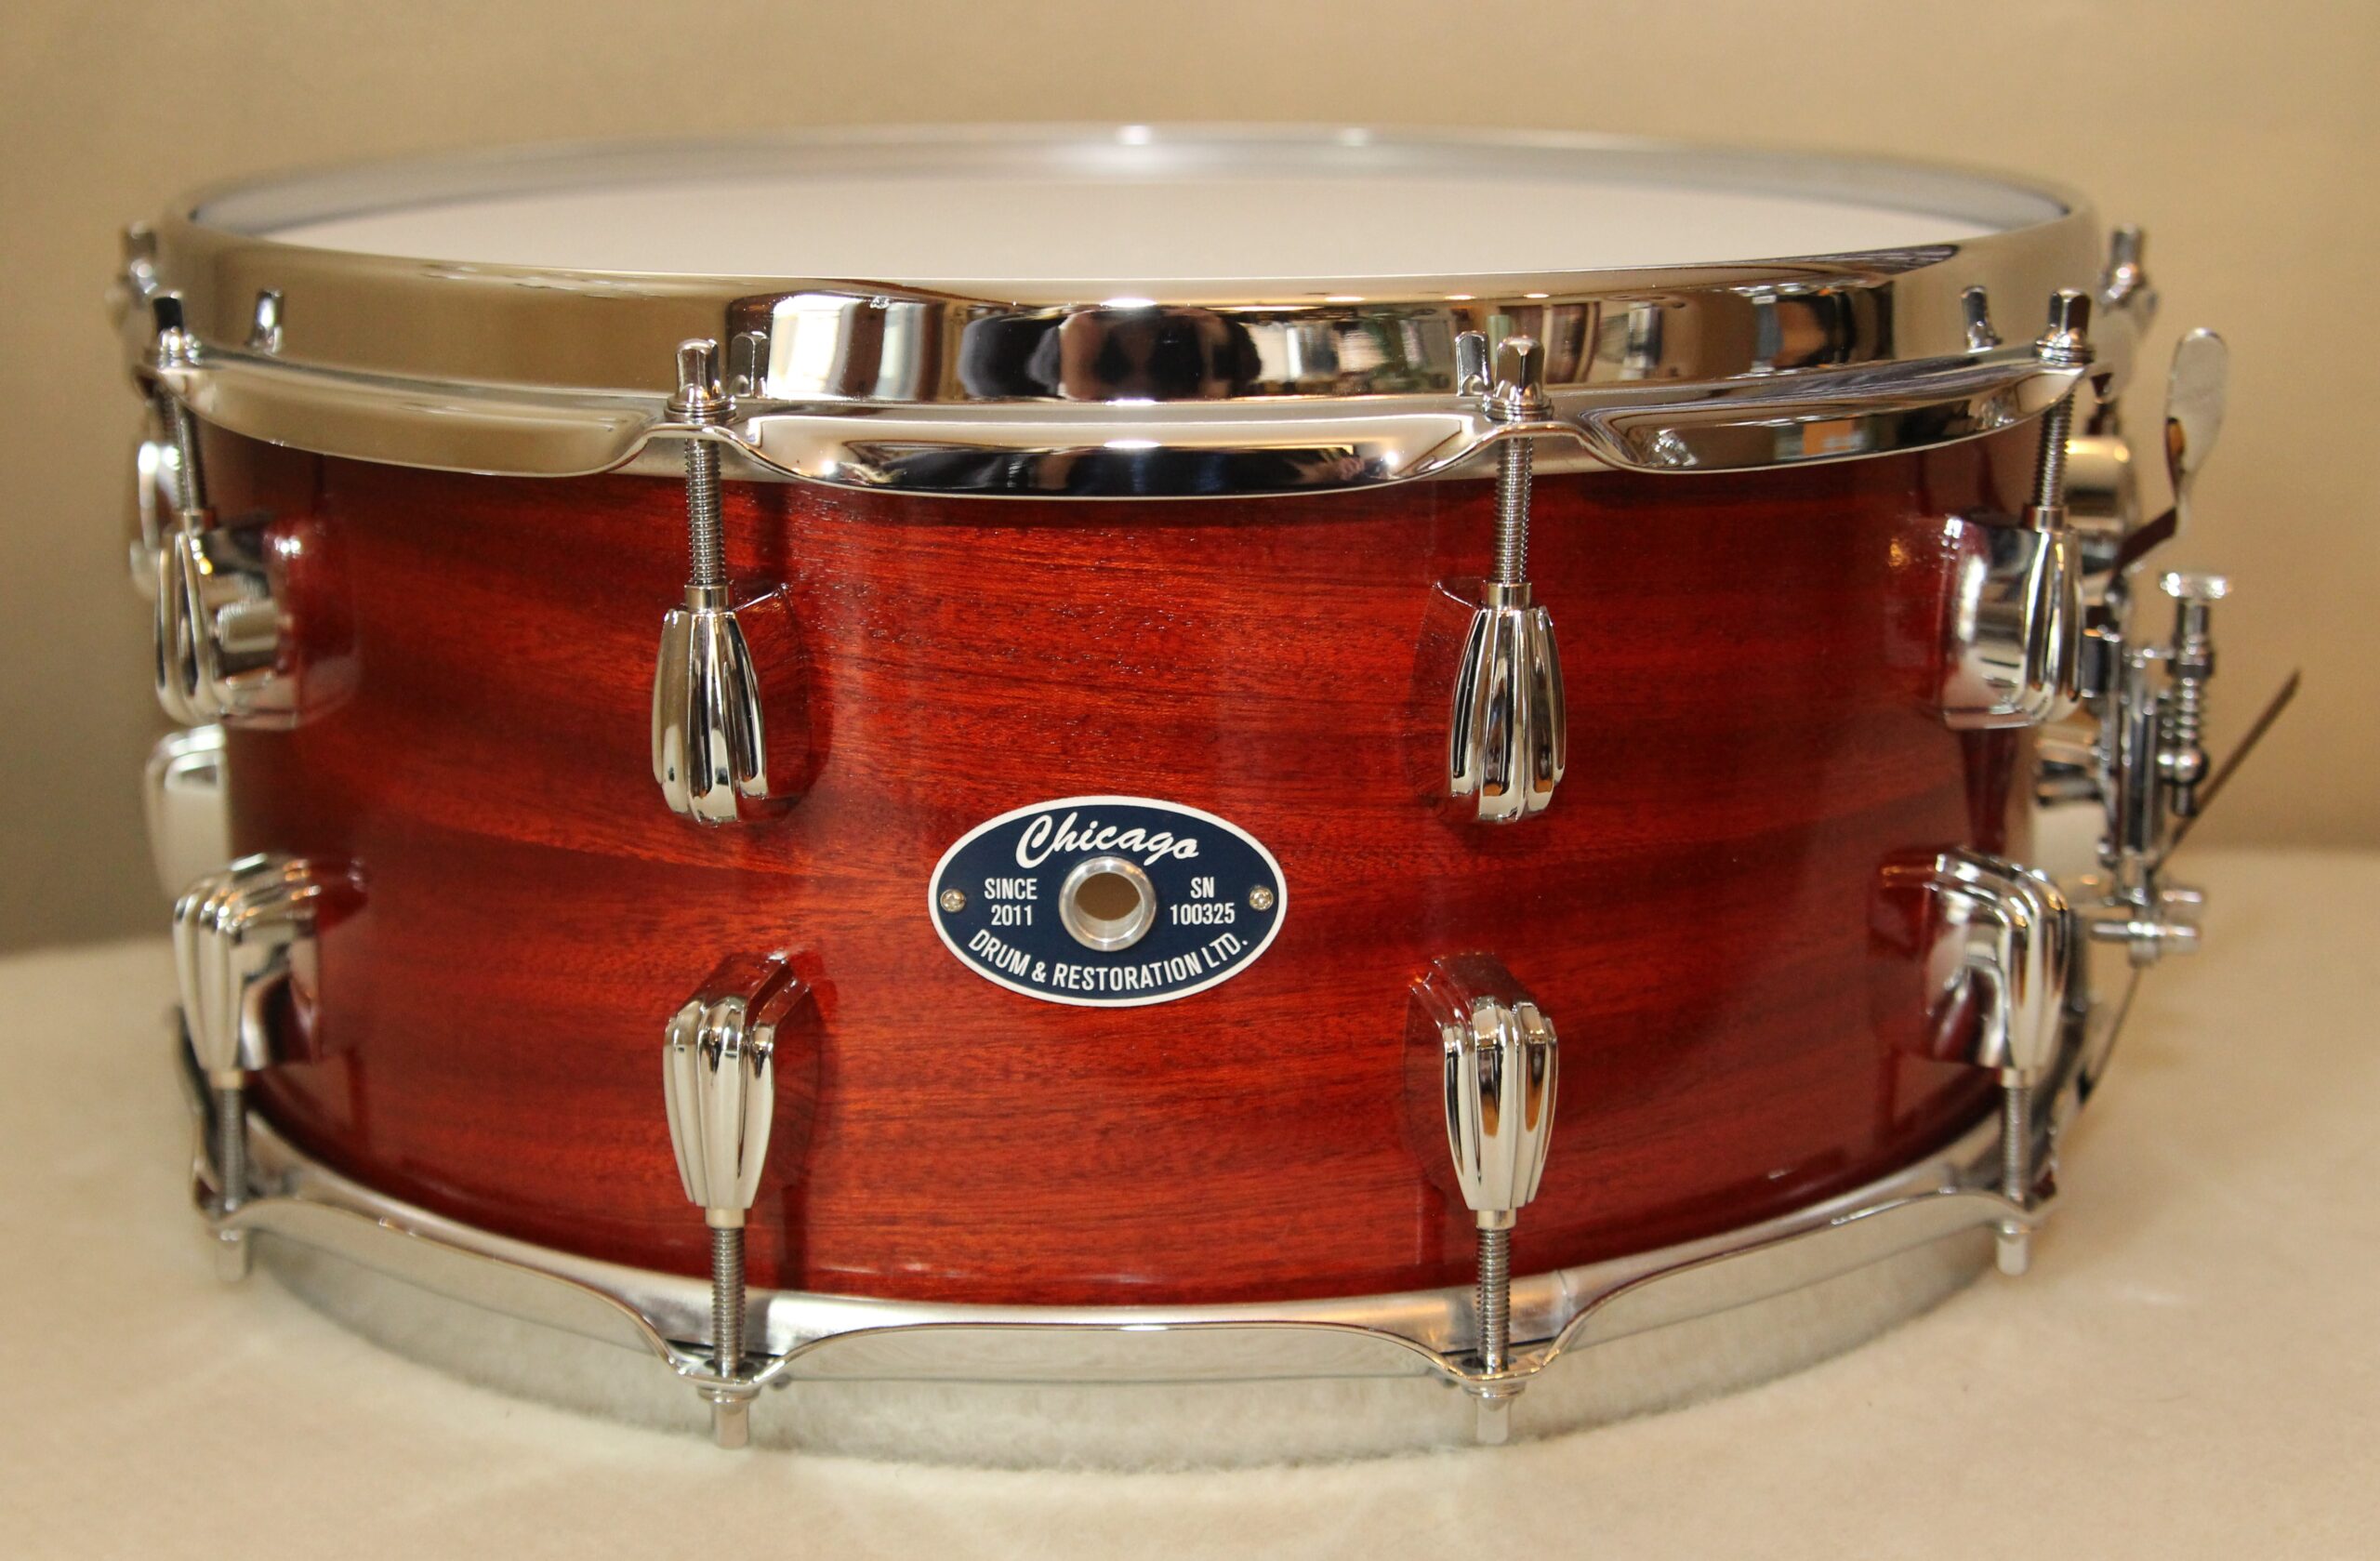 Snare Drum - 6-1/2" Mahogany/Poplar Shell with Red Stain - Chicago Drum